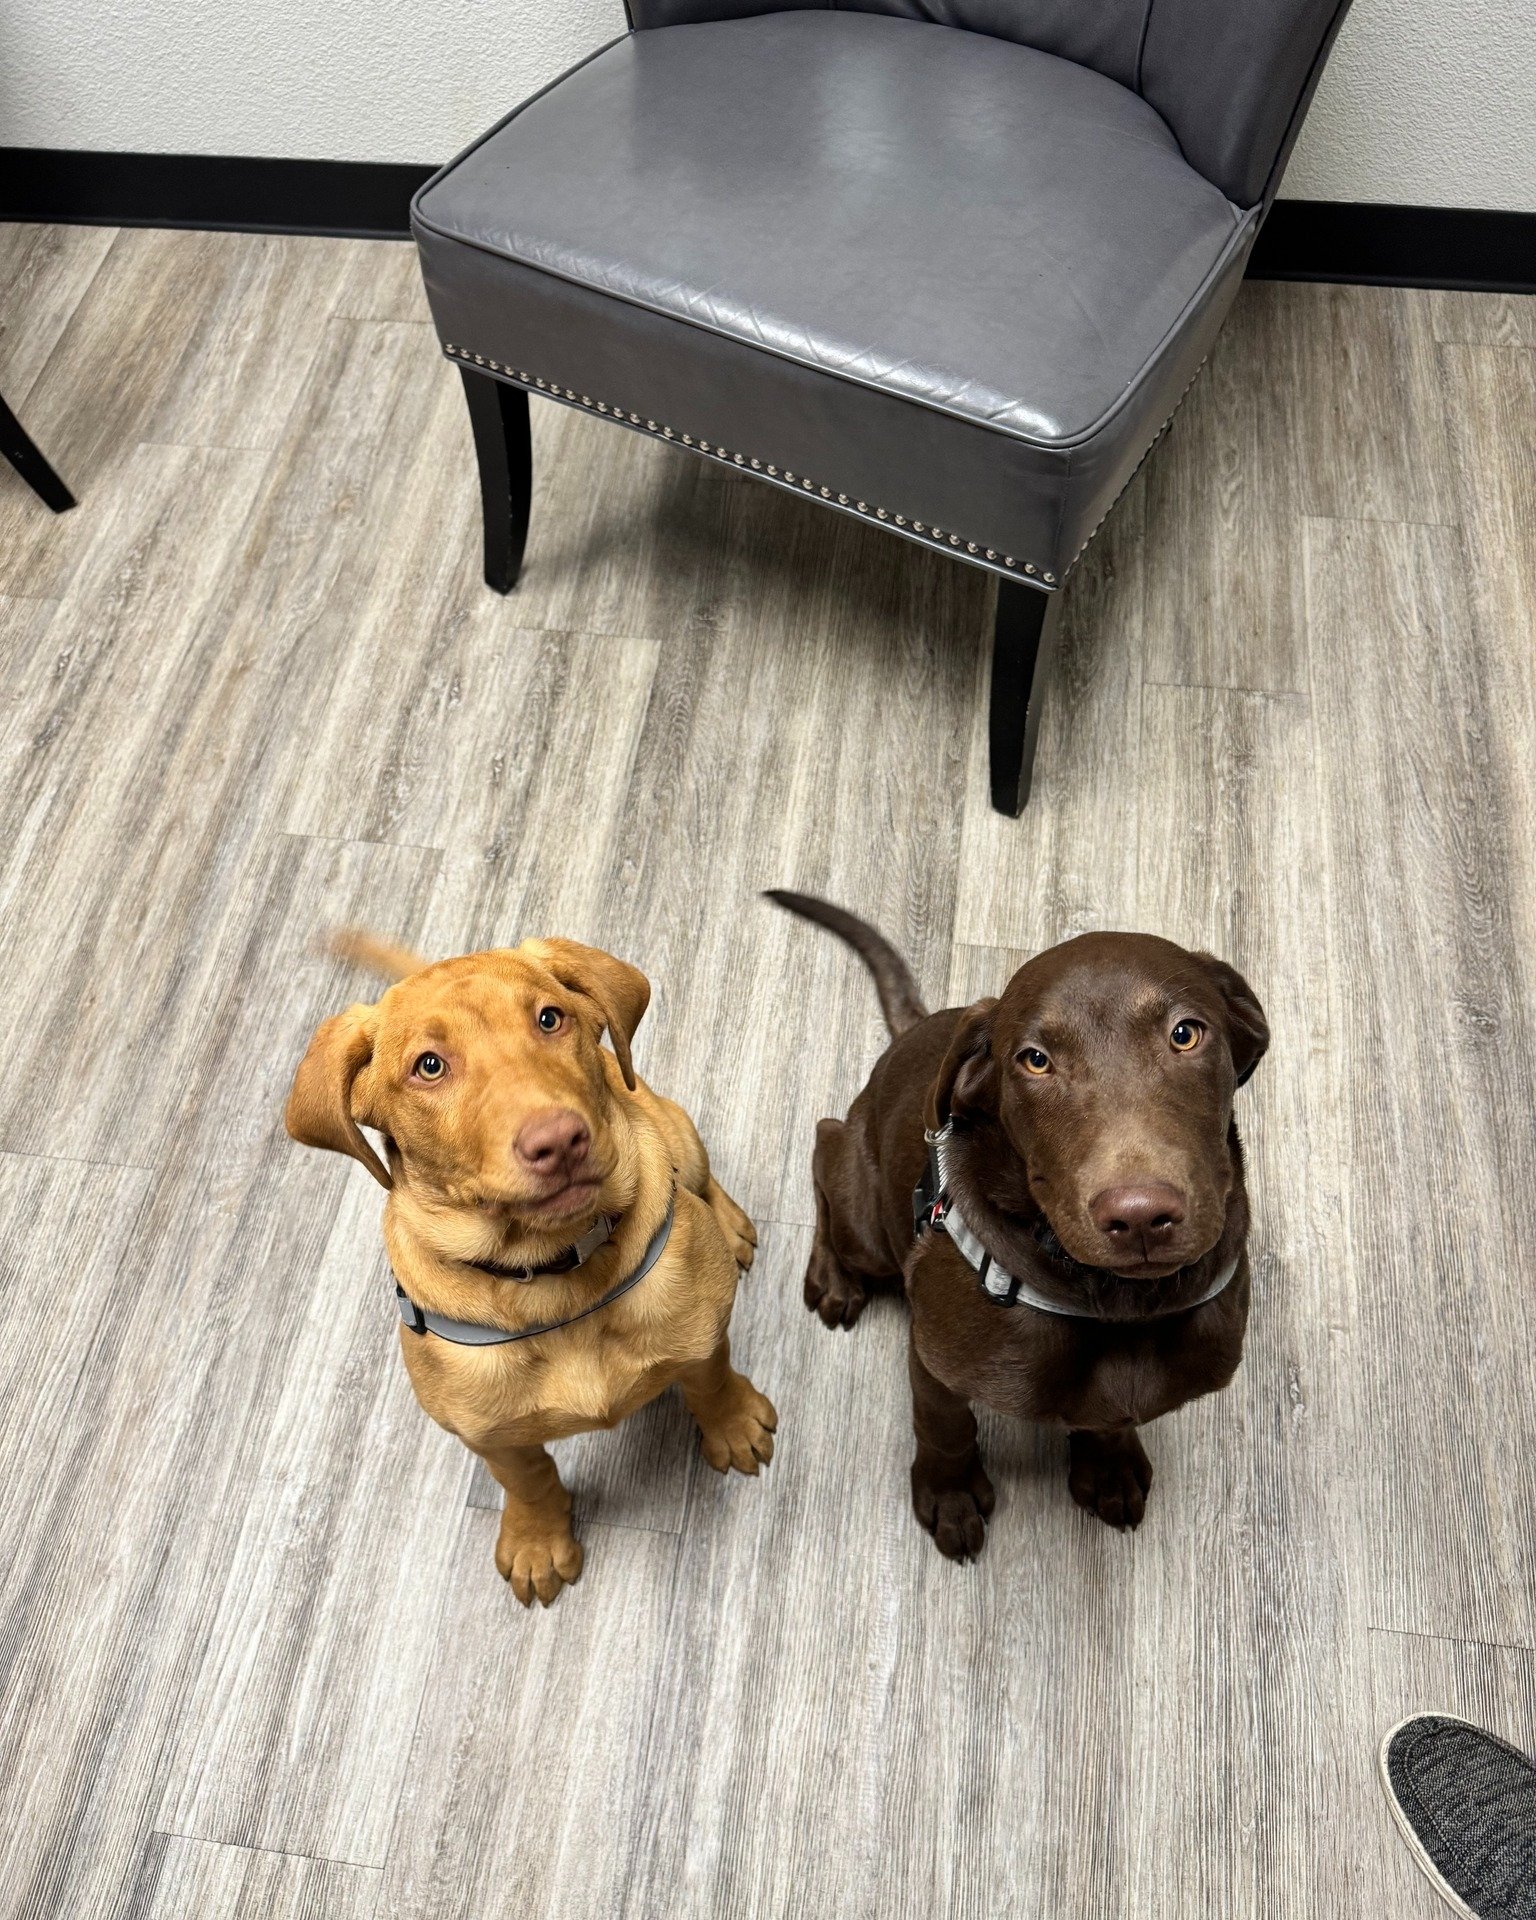 ☀️ Kickstart your Monday with some serious puppy cuteness! 🐾💕 We're starting the week off on the right paw with adorable photos of some of our furry clients from last week. 😍 Whether you need a little pick-me-up or just want to start your day with